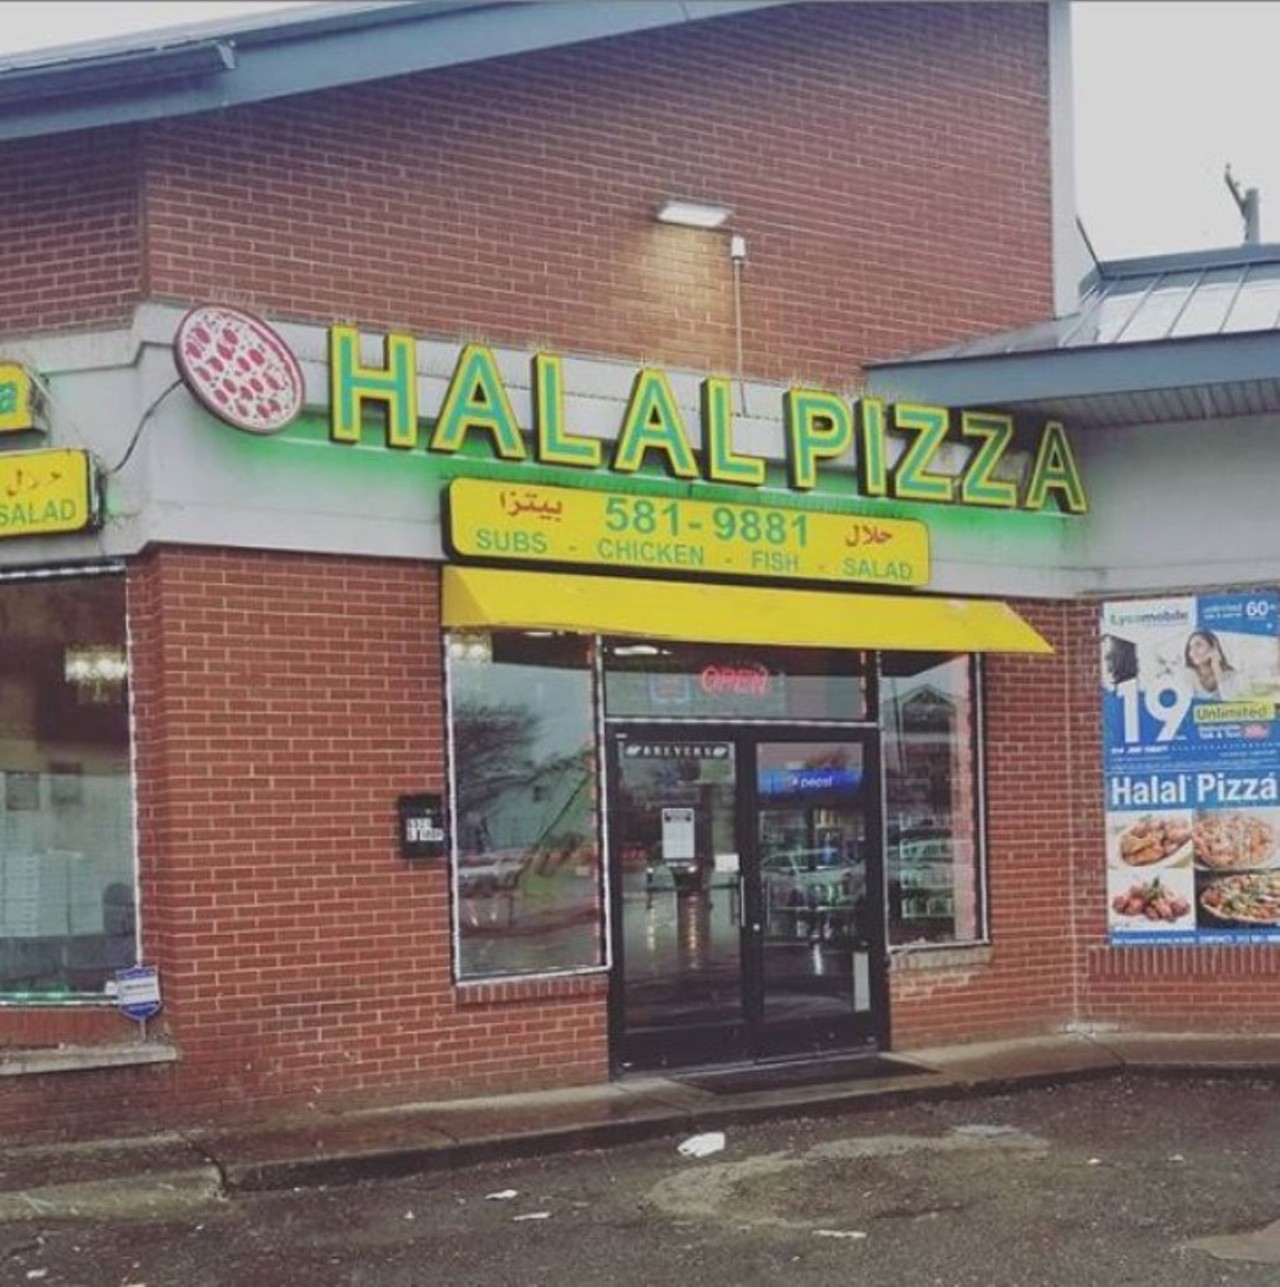 Halal Pizza
6531 Greenfield Rd.; Detroit; 313-581-9880
Do you love pizza, but you need your meat prepared using Halal methods? Halal Pizza is the perfect solution. Come hungry and try the chicken or steak calzone.
Photo courtesy of Halal Pizza/Facebook